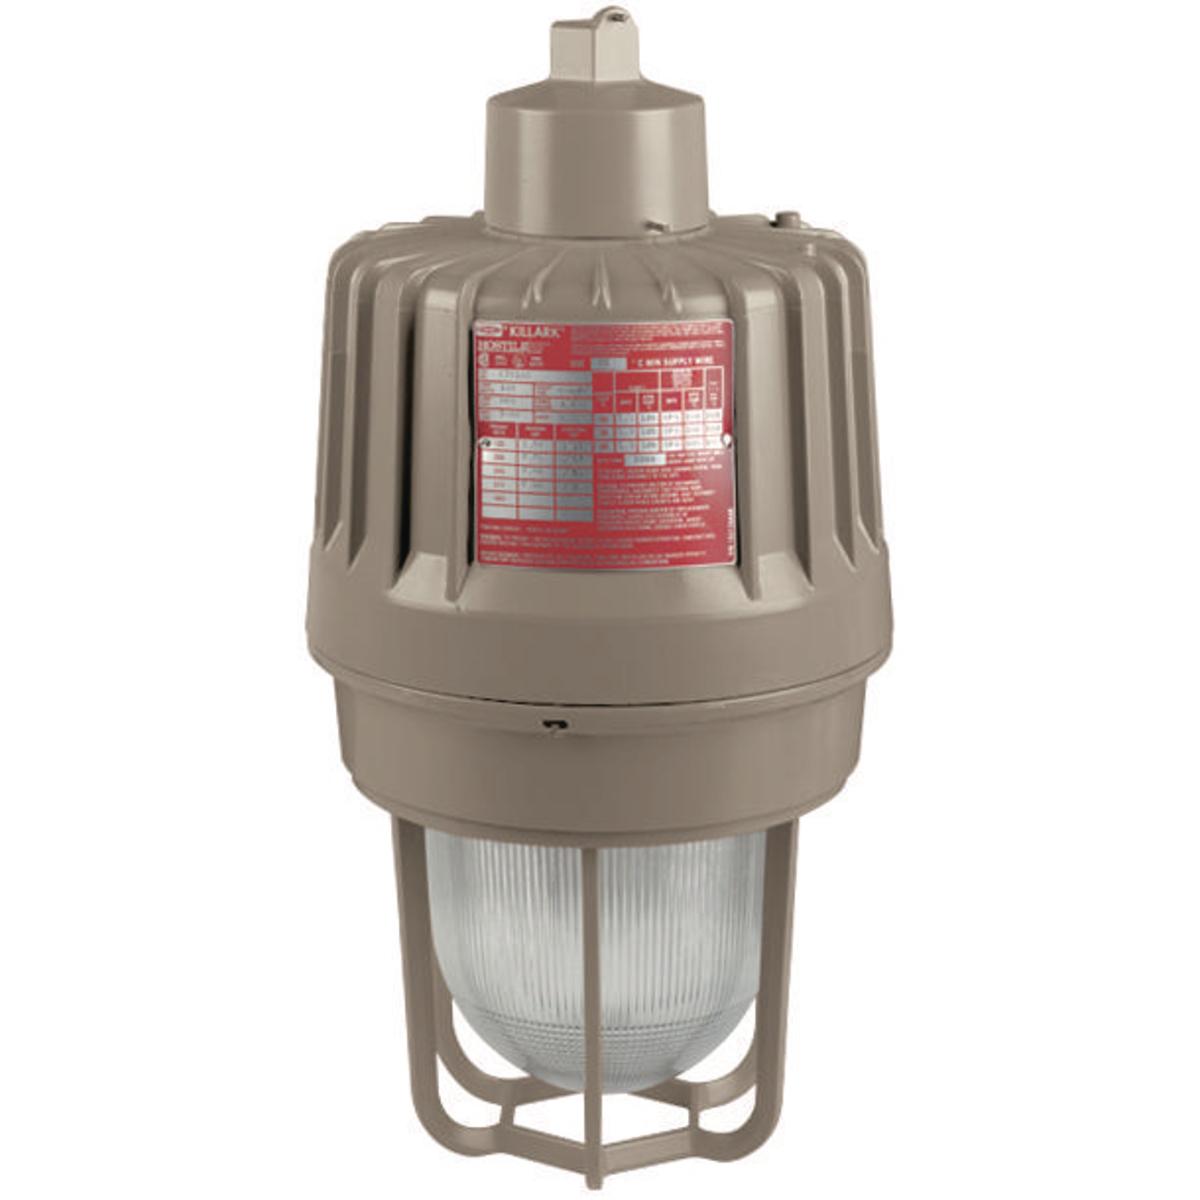 Hubbell EZS105A3 100W 480V High Pressure Sodium 1" Pendant  ; Three light sources – High Pressure Sodium (50-400W), Metal Halide (70-400W) and Pulse Start Metal Halide (175-400W) ; Mounting choice –Pendant, ceiling, 25˚ stanchion or 90˚ wall mount, all with “wireless” des